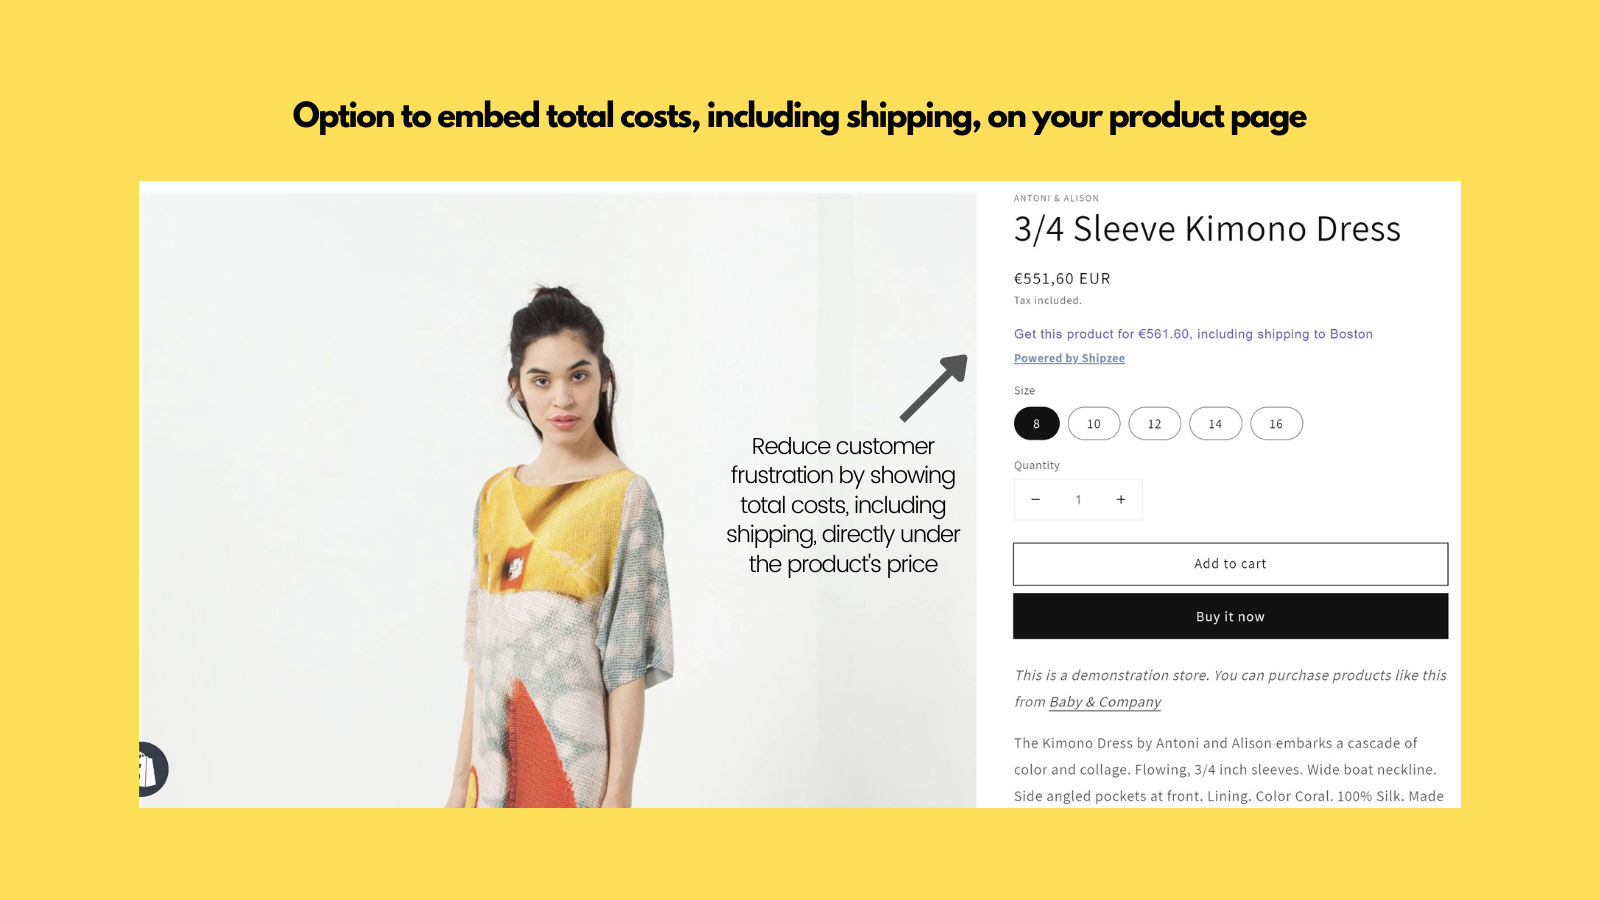 Option to embed shipping costs in product page